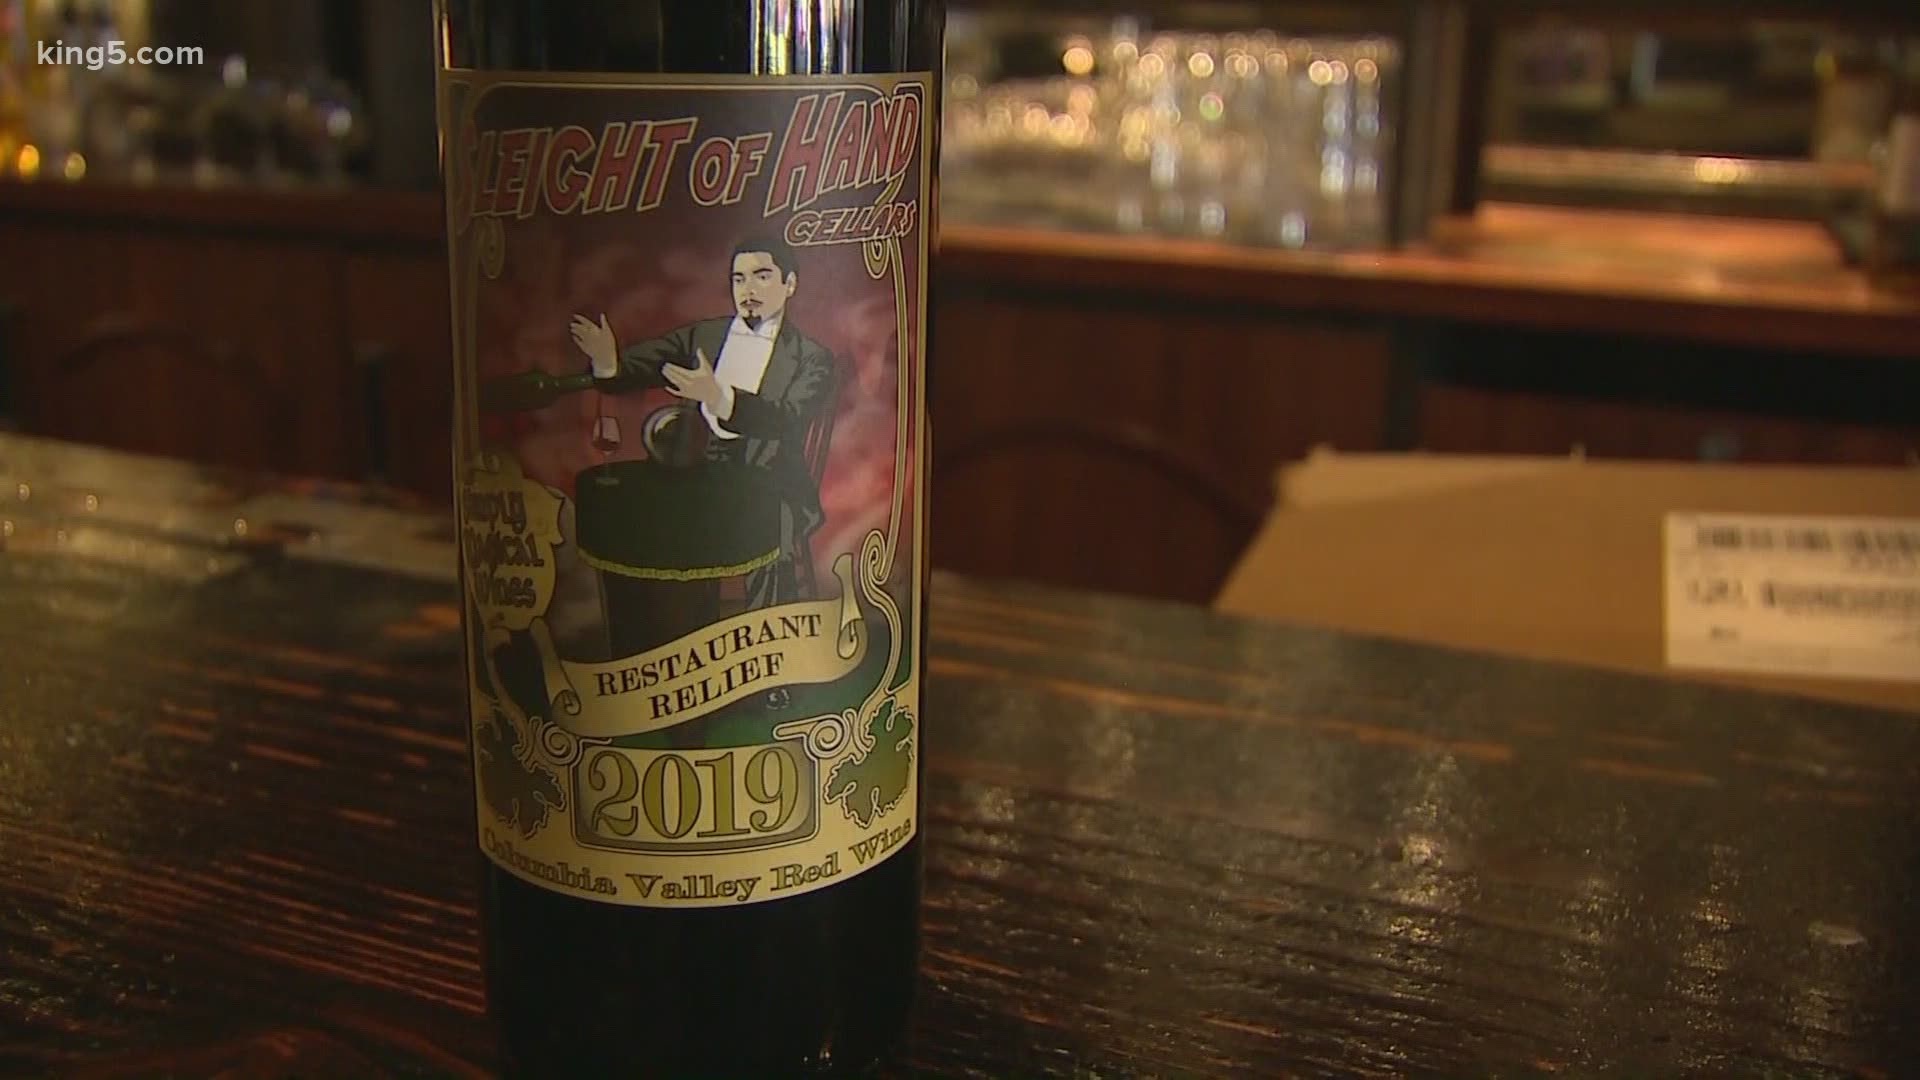 Sleight of Hand Cellars wanted to support the restaurant industry by off-loading 300 cases of 2019 Restaurant Relief Wine, a 100% Syrah from Yakima Valley.